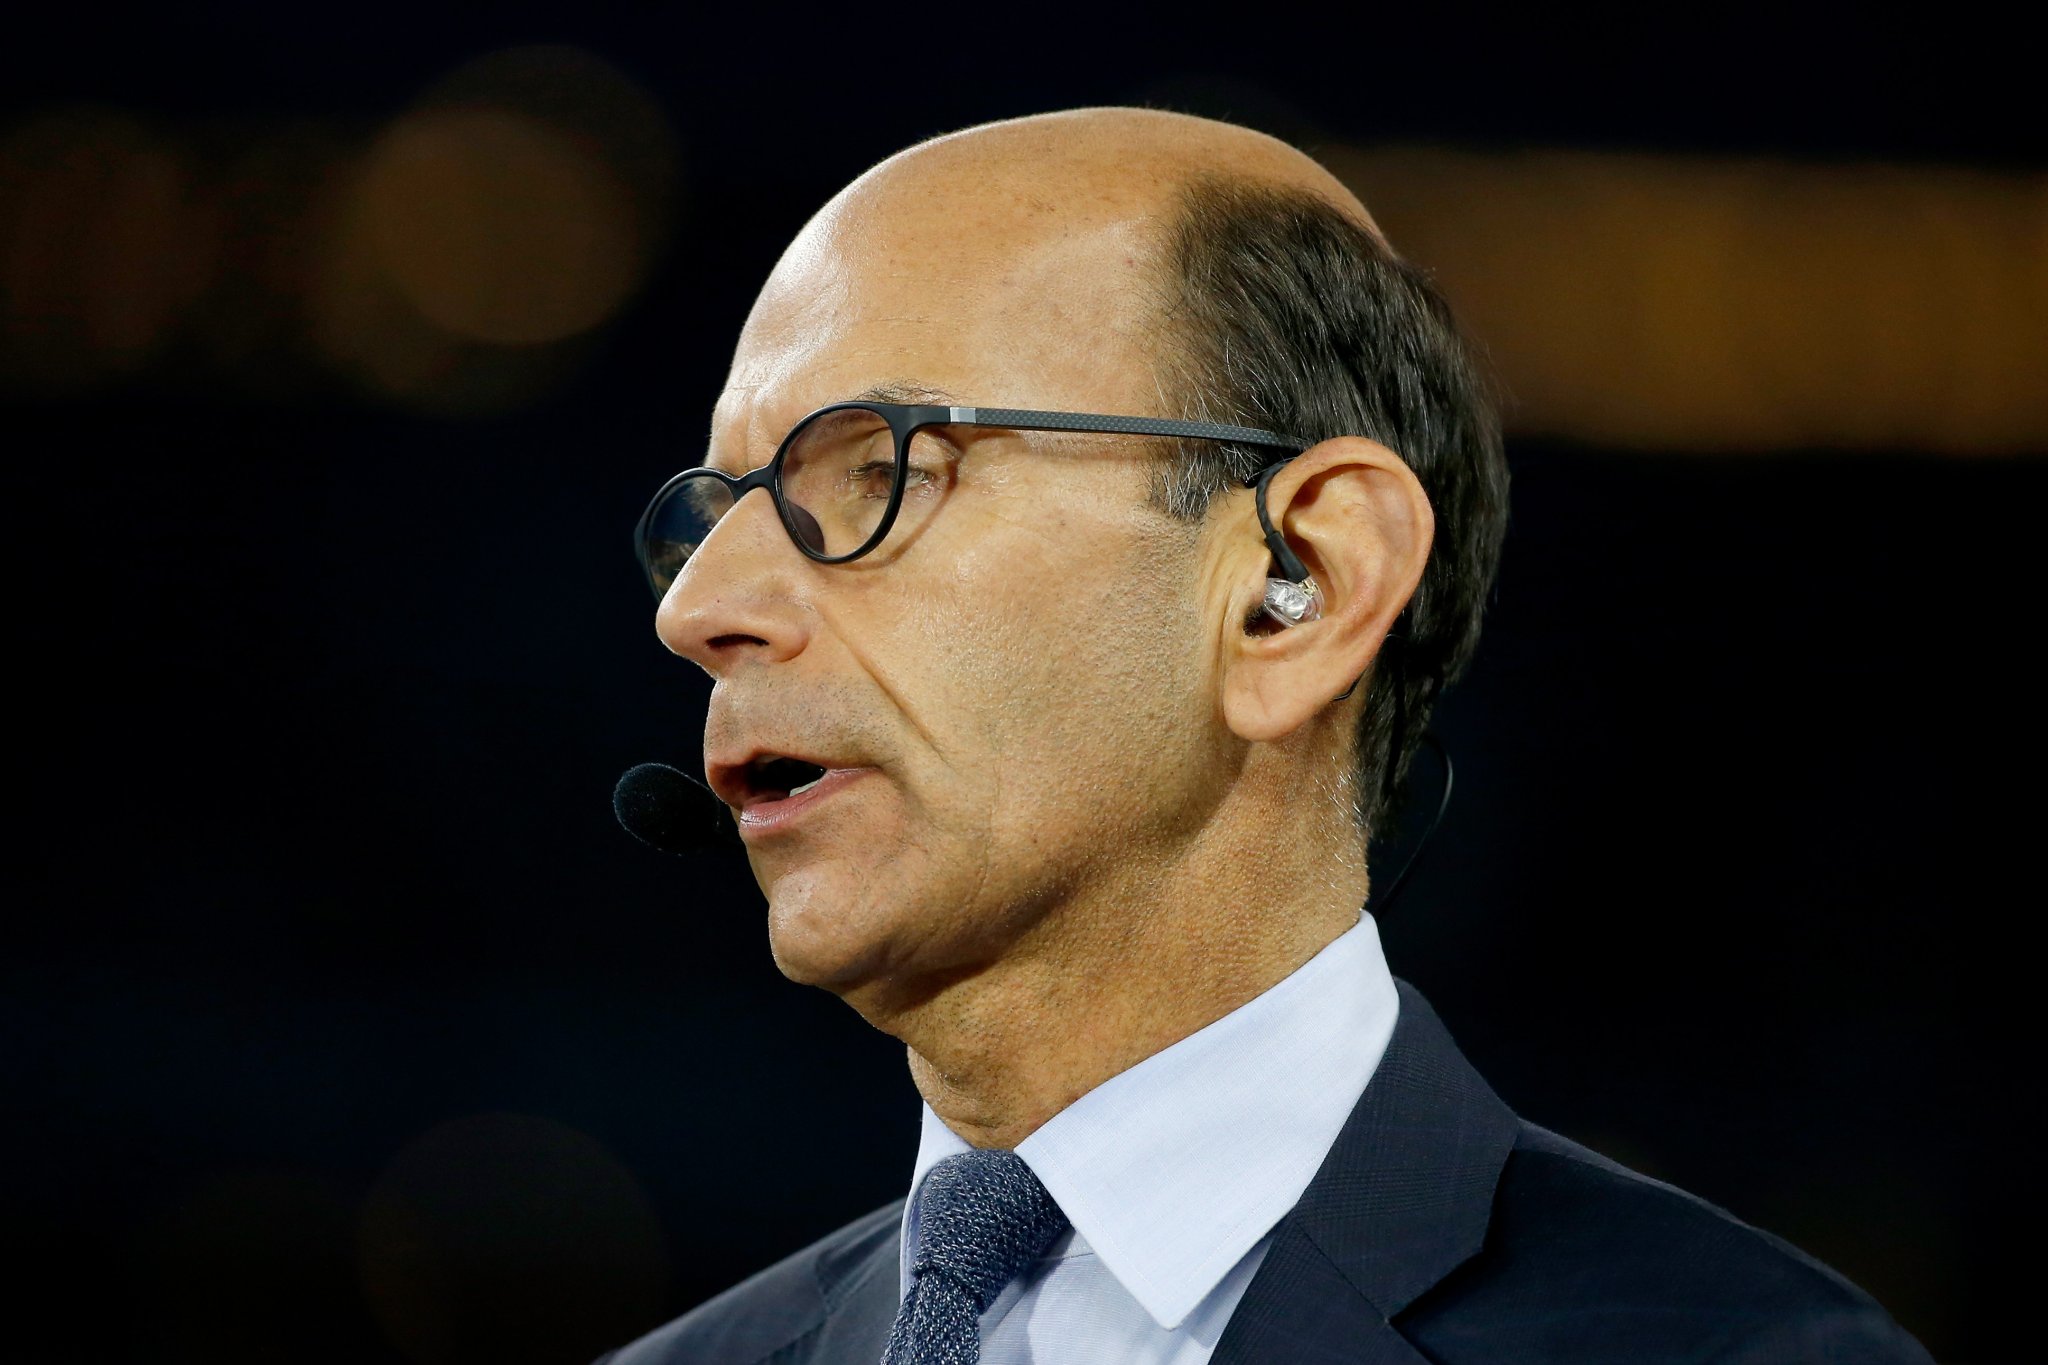 Paul Finebaum Shares His Opinion As To Why Lincoln Riley Left Oklahoma For USC